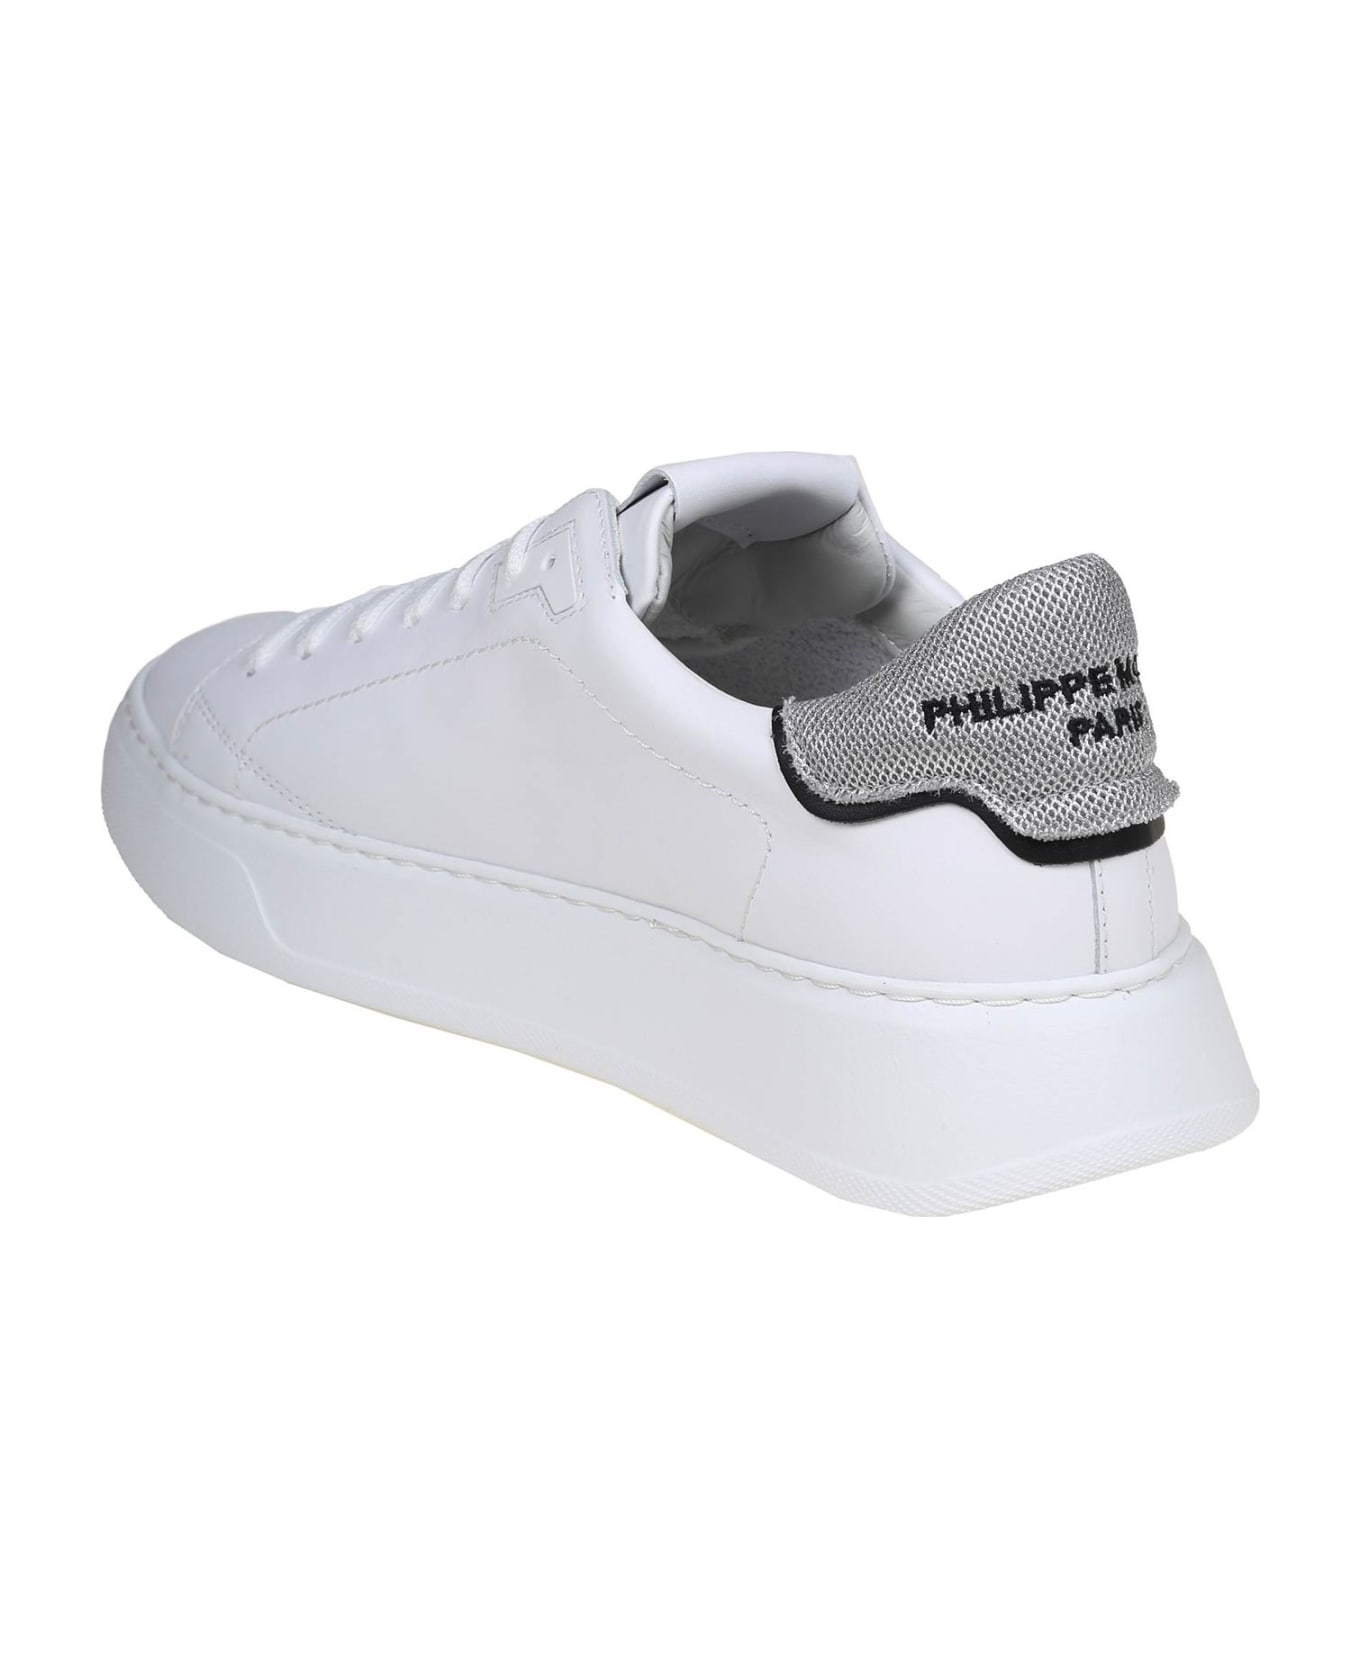 Philippe Model Temple Low Sneakers In White And Silver Leather - Blanc Argent